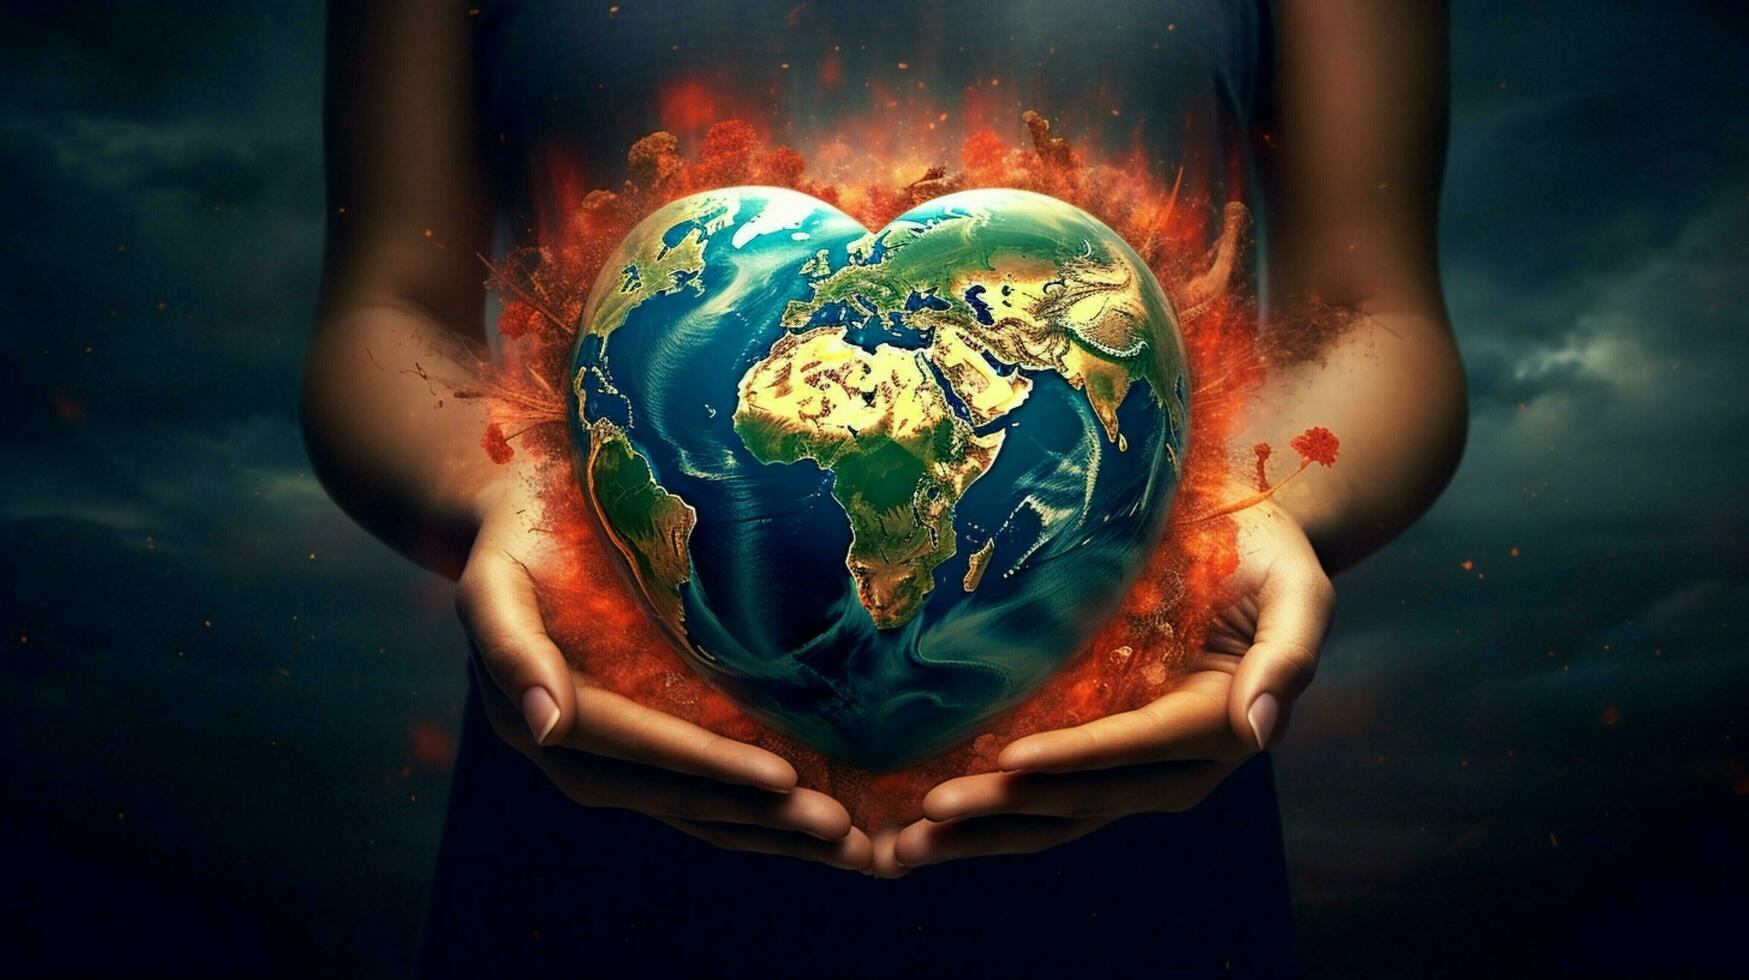 love holds the world with creative inspiration photo